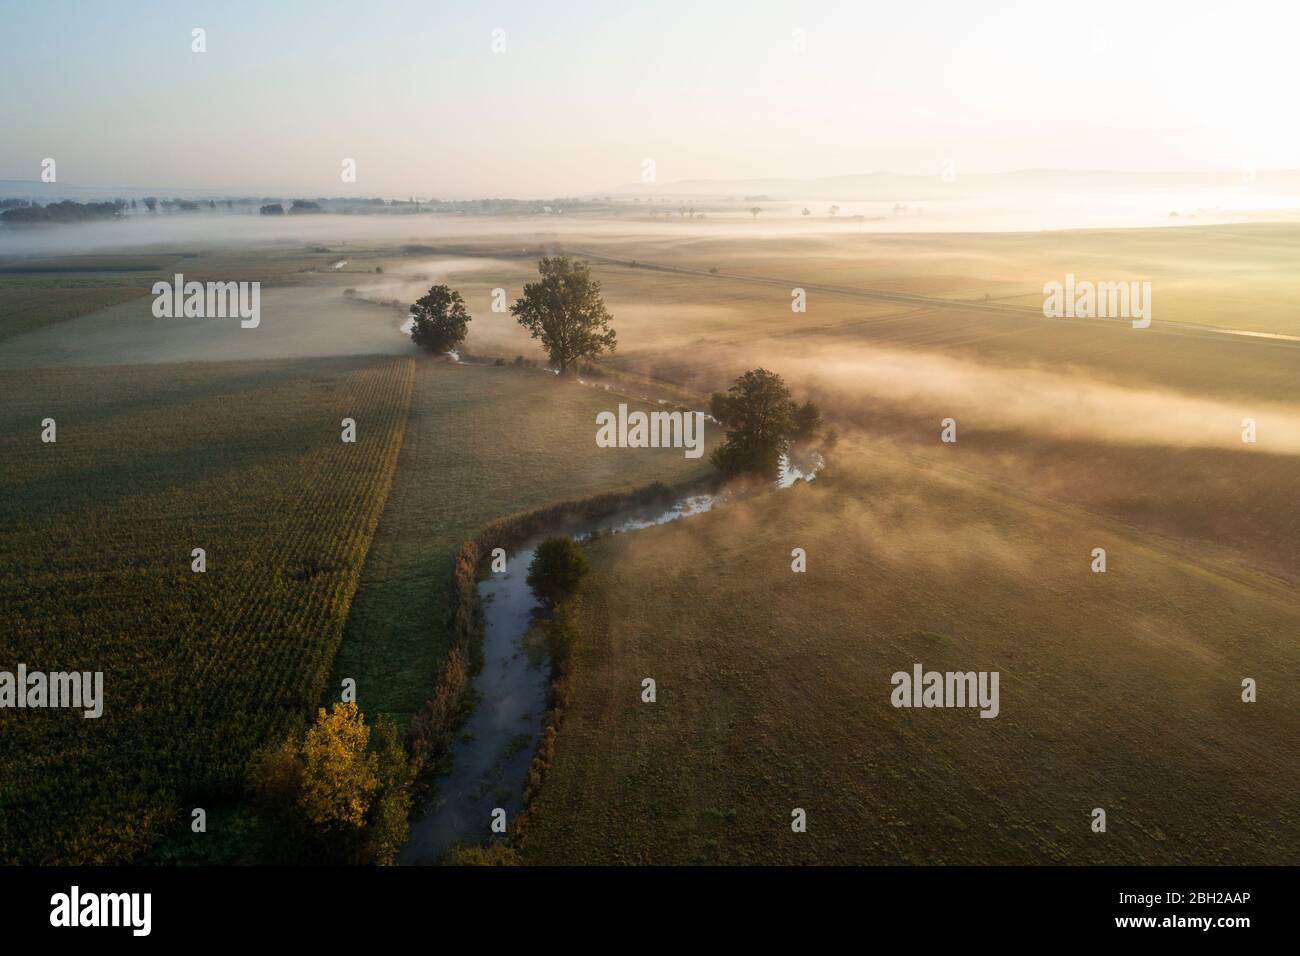 Germany, Bavaria, Drone view of river Aisch and surrounding countryside landscape at foggy sunrise Stock Photo